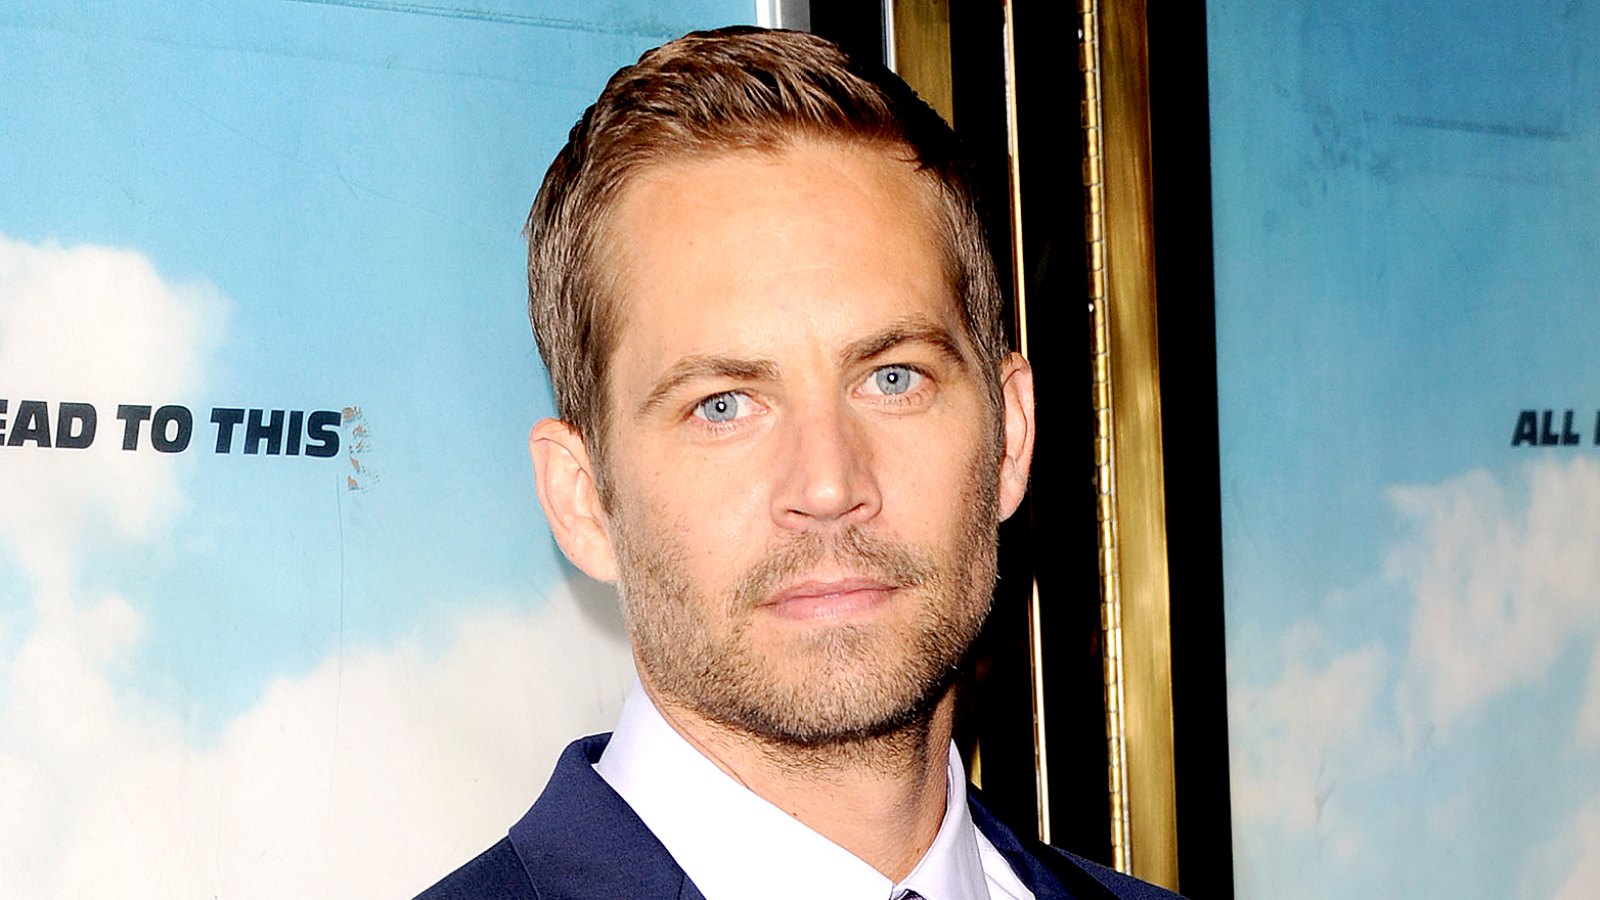 Paul Walker attends the "Fast & Furious 6" World Premiere at The Empire, Leicester Square on May 7, 2013 in London, England.